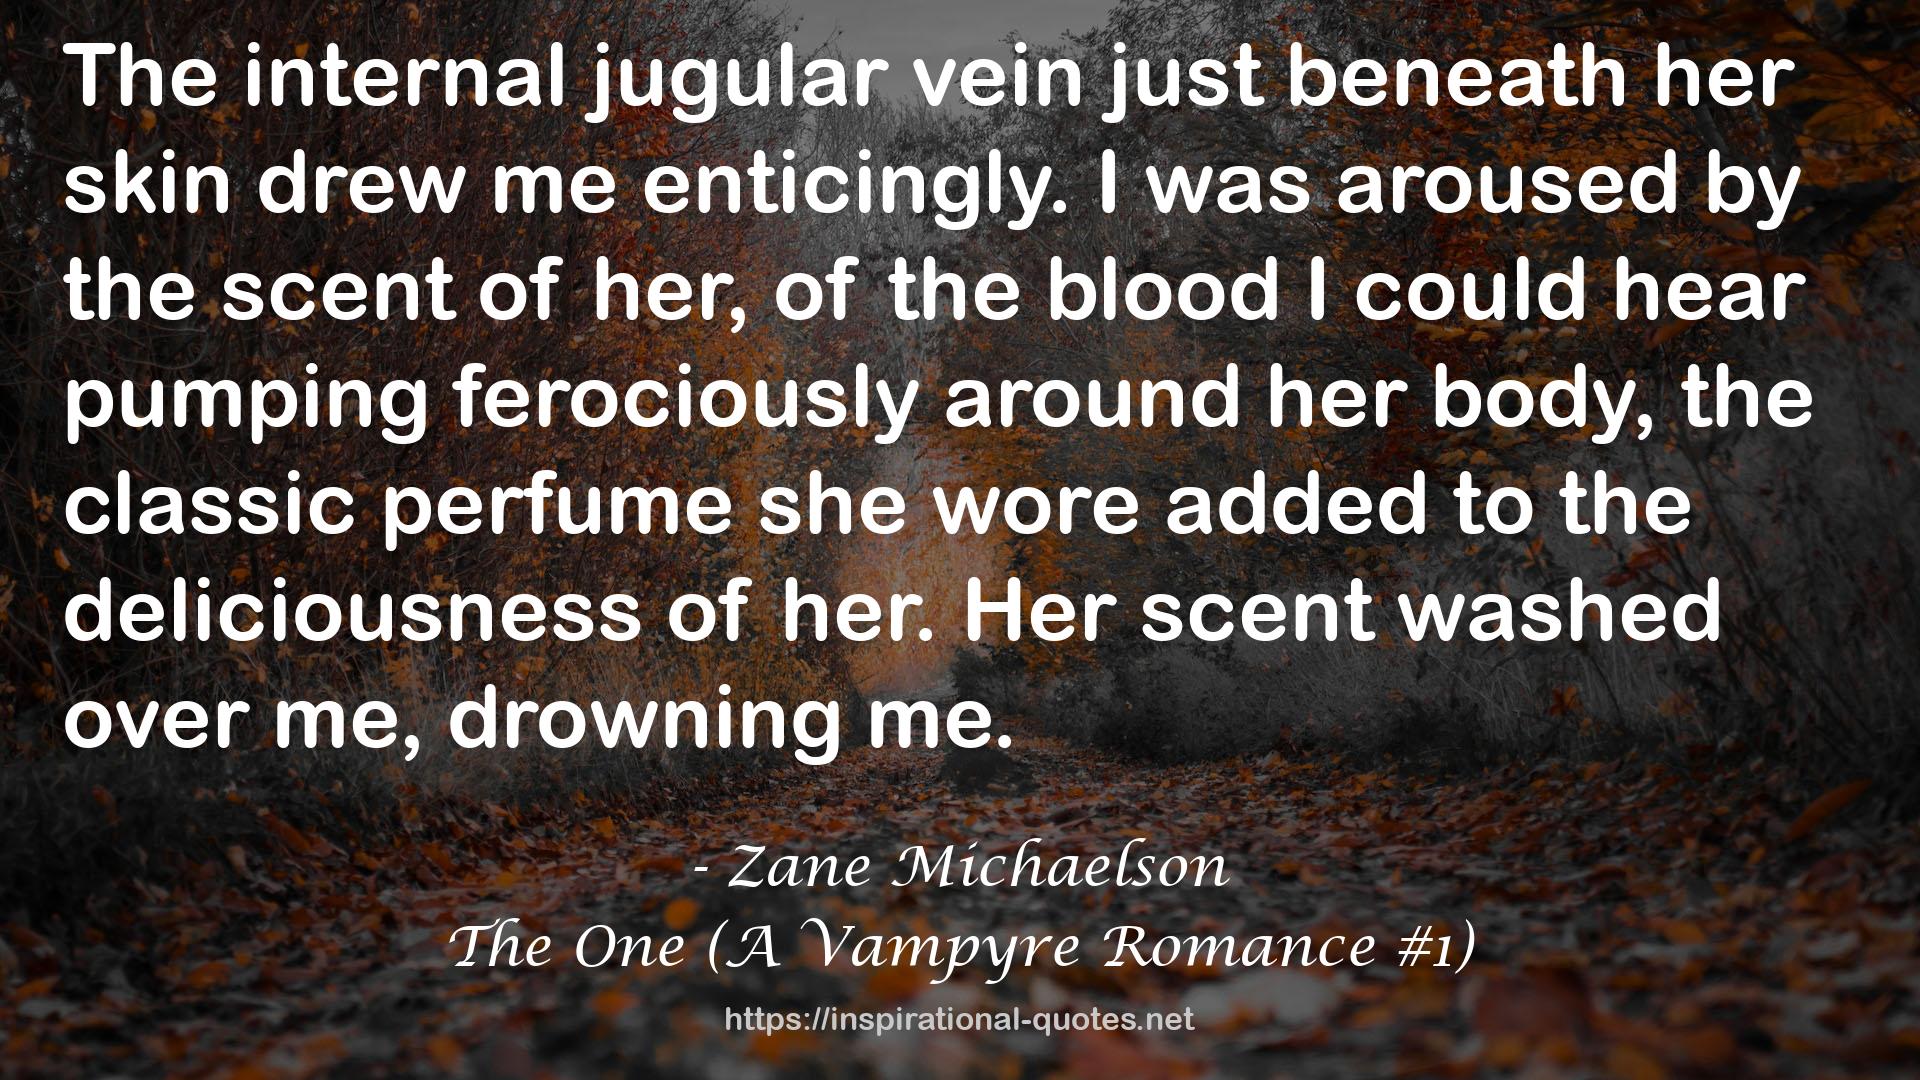 The One (A Vampyre Romance #1) QUOTES